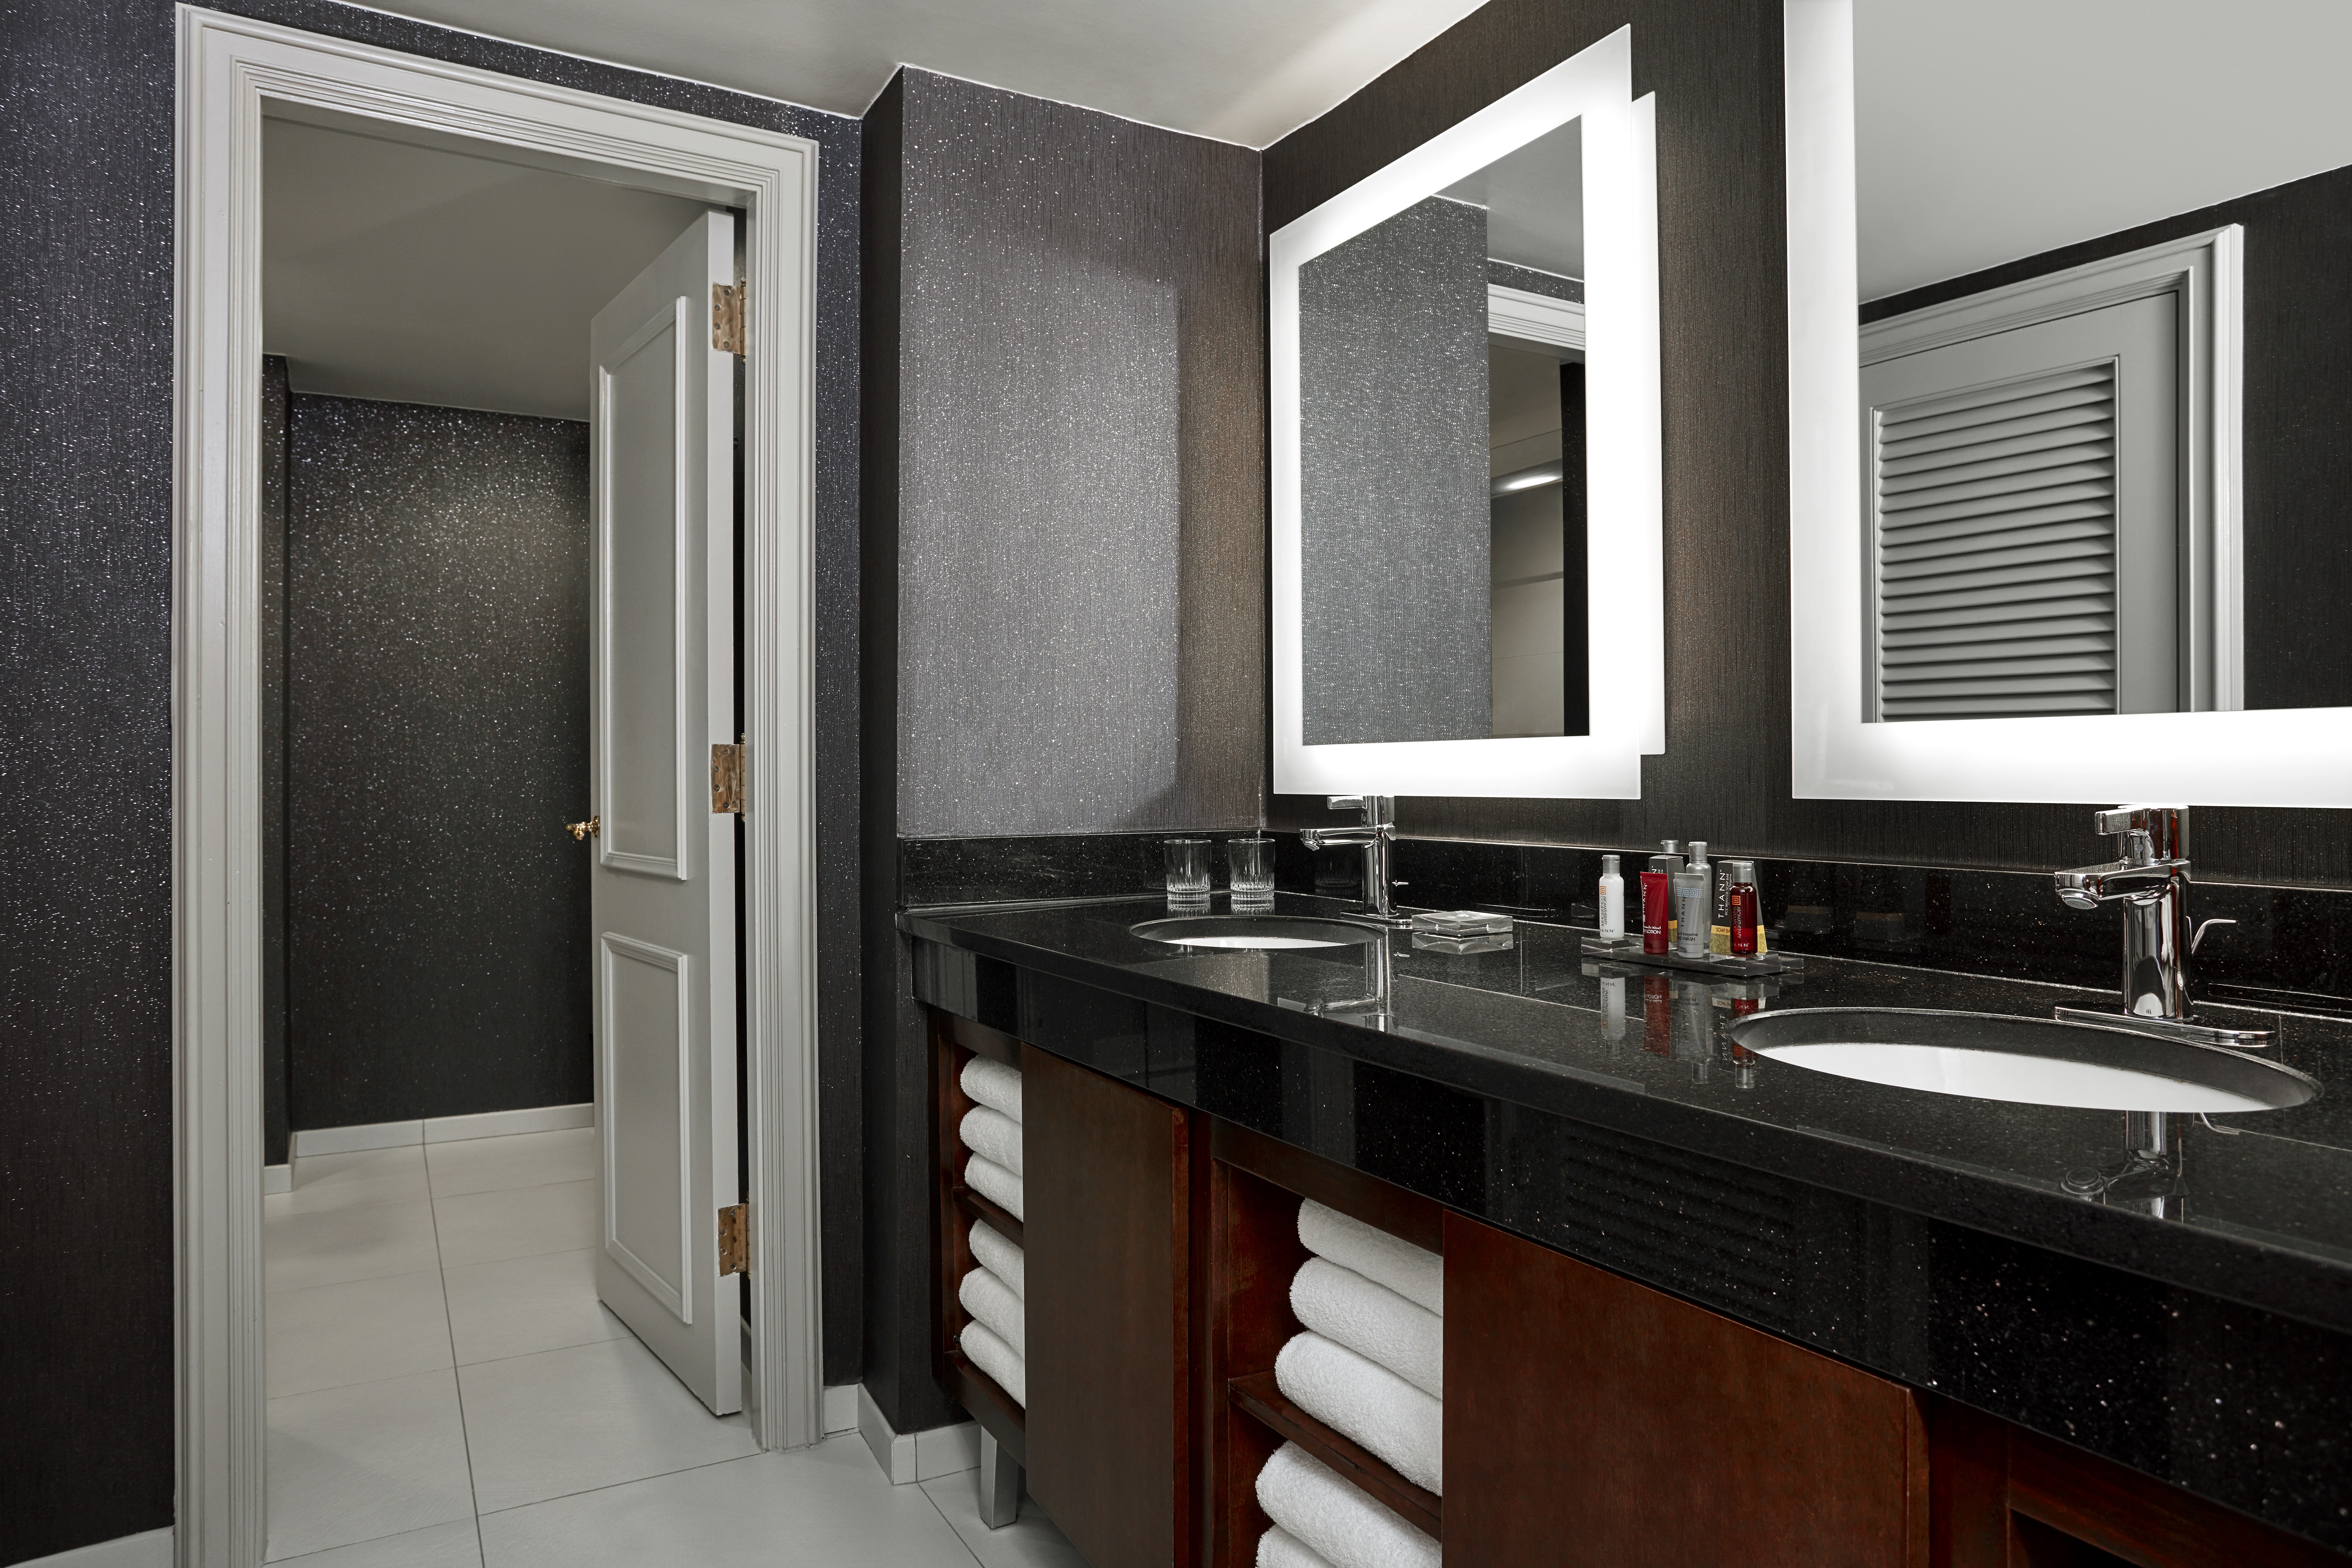 Bathroom with dark brown furniture, large mirrors and two sinks